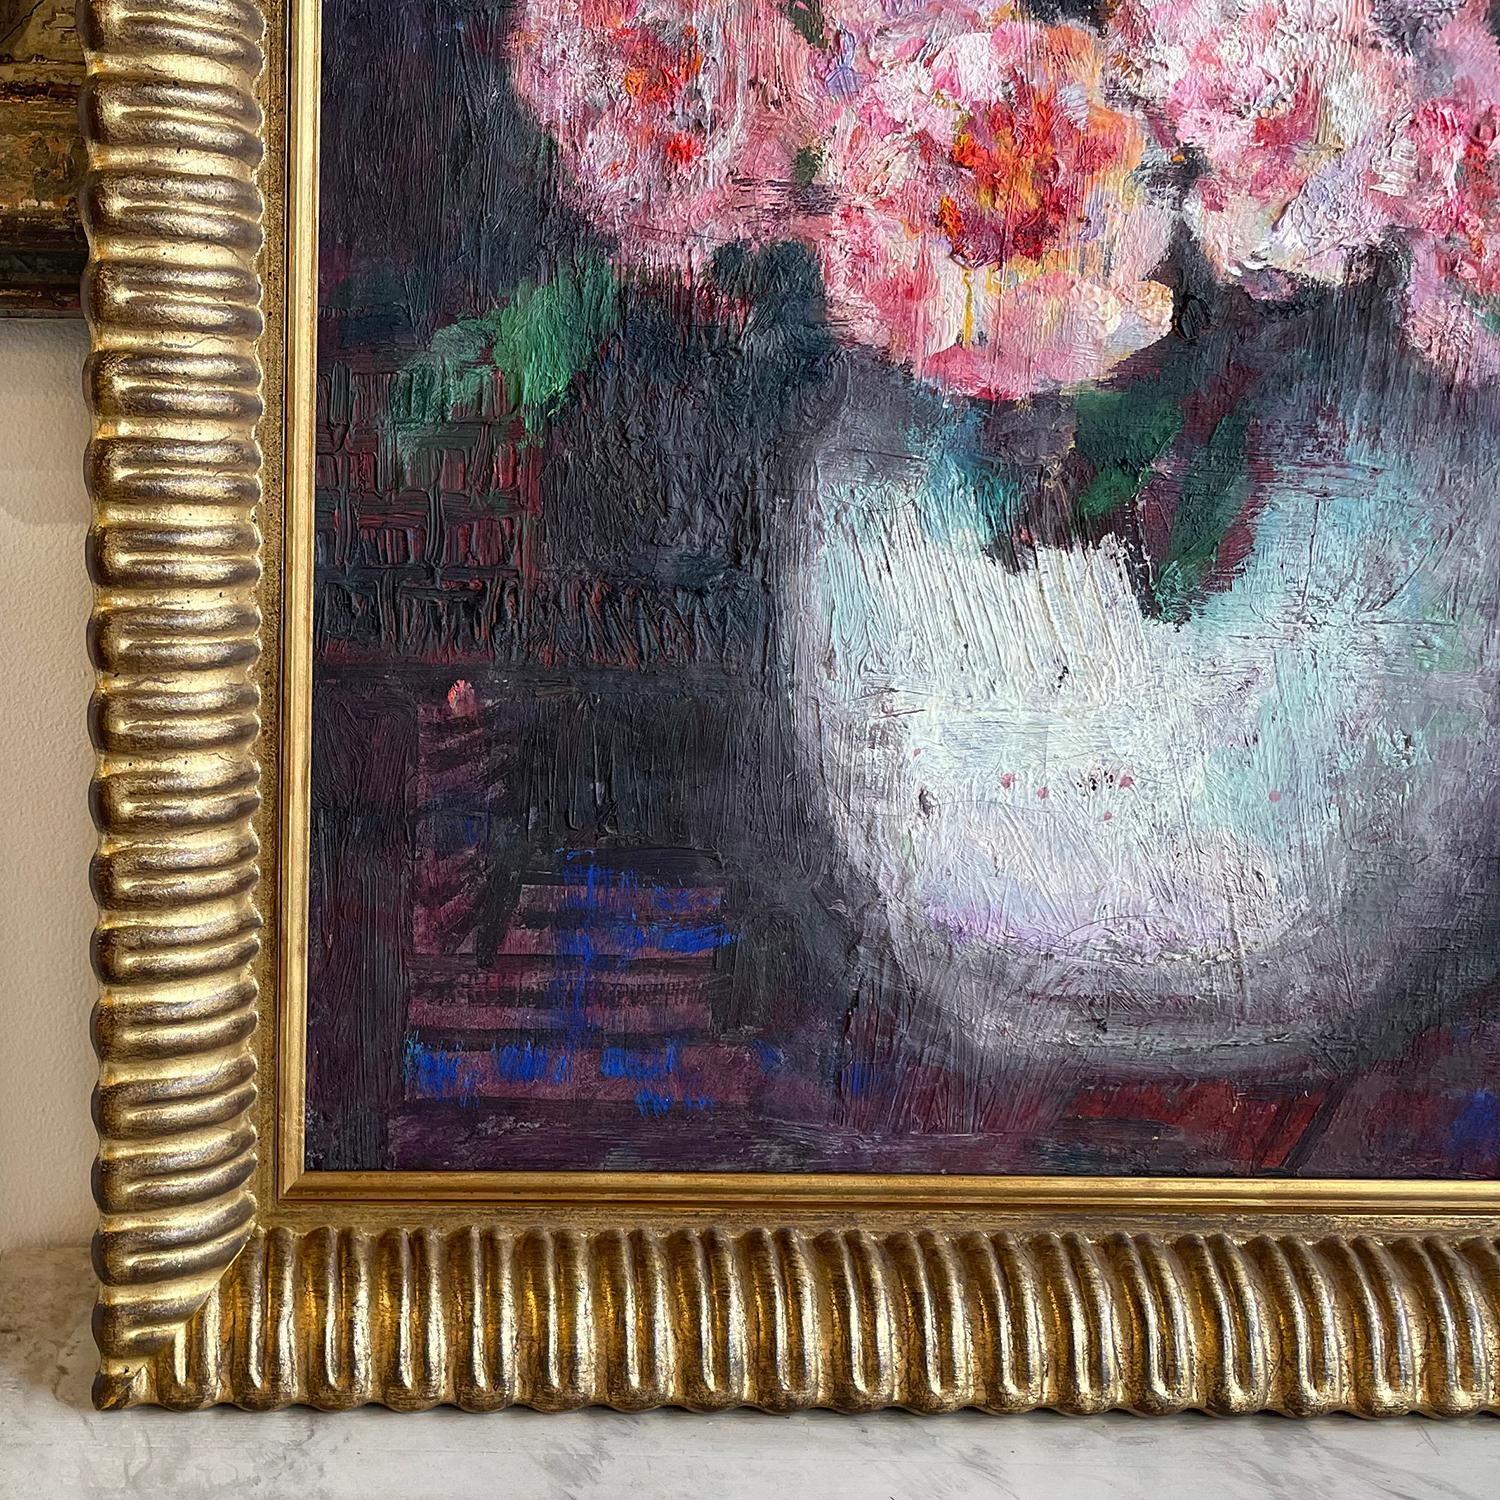 A dark-green, light-lilac oil on canvas painting of a vase with pink anemones, flowers painted by Victor Charreton, in good condition. The antique French painting represents the 19th Century Impressionism art movement, period. Signed on the lower